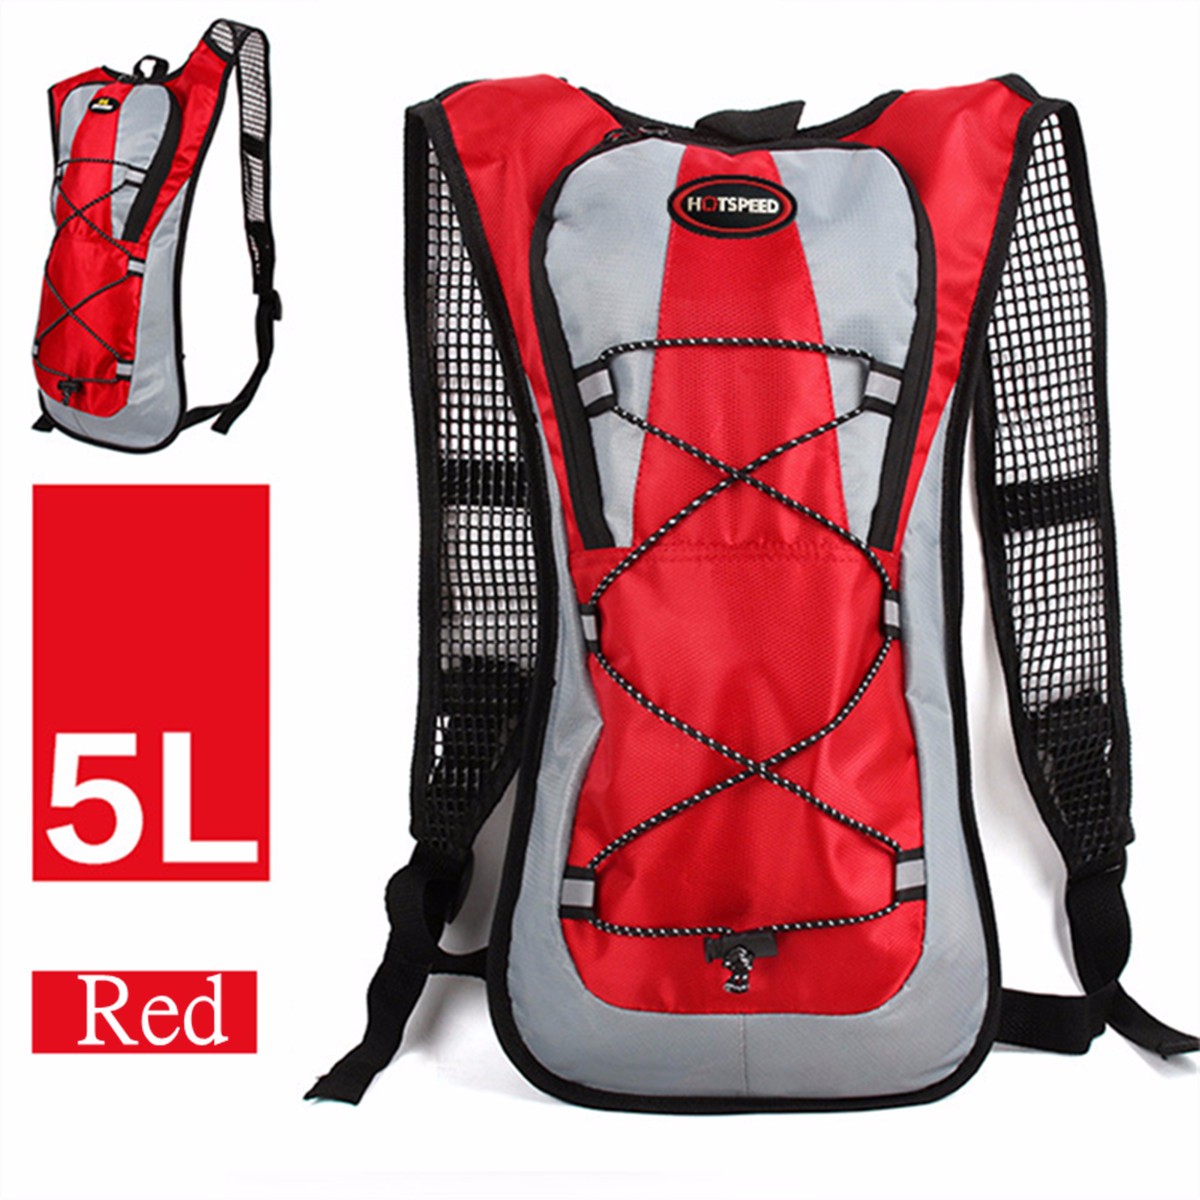 IPRee-5L-Running-Hydration-Backpack-Rucksack-2L-Straw-Water-Bladder-Bag-For-Hiking-Climbing-1126379-4